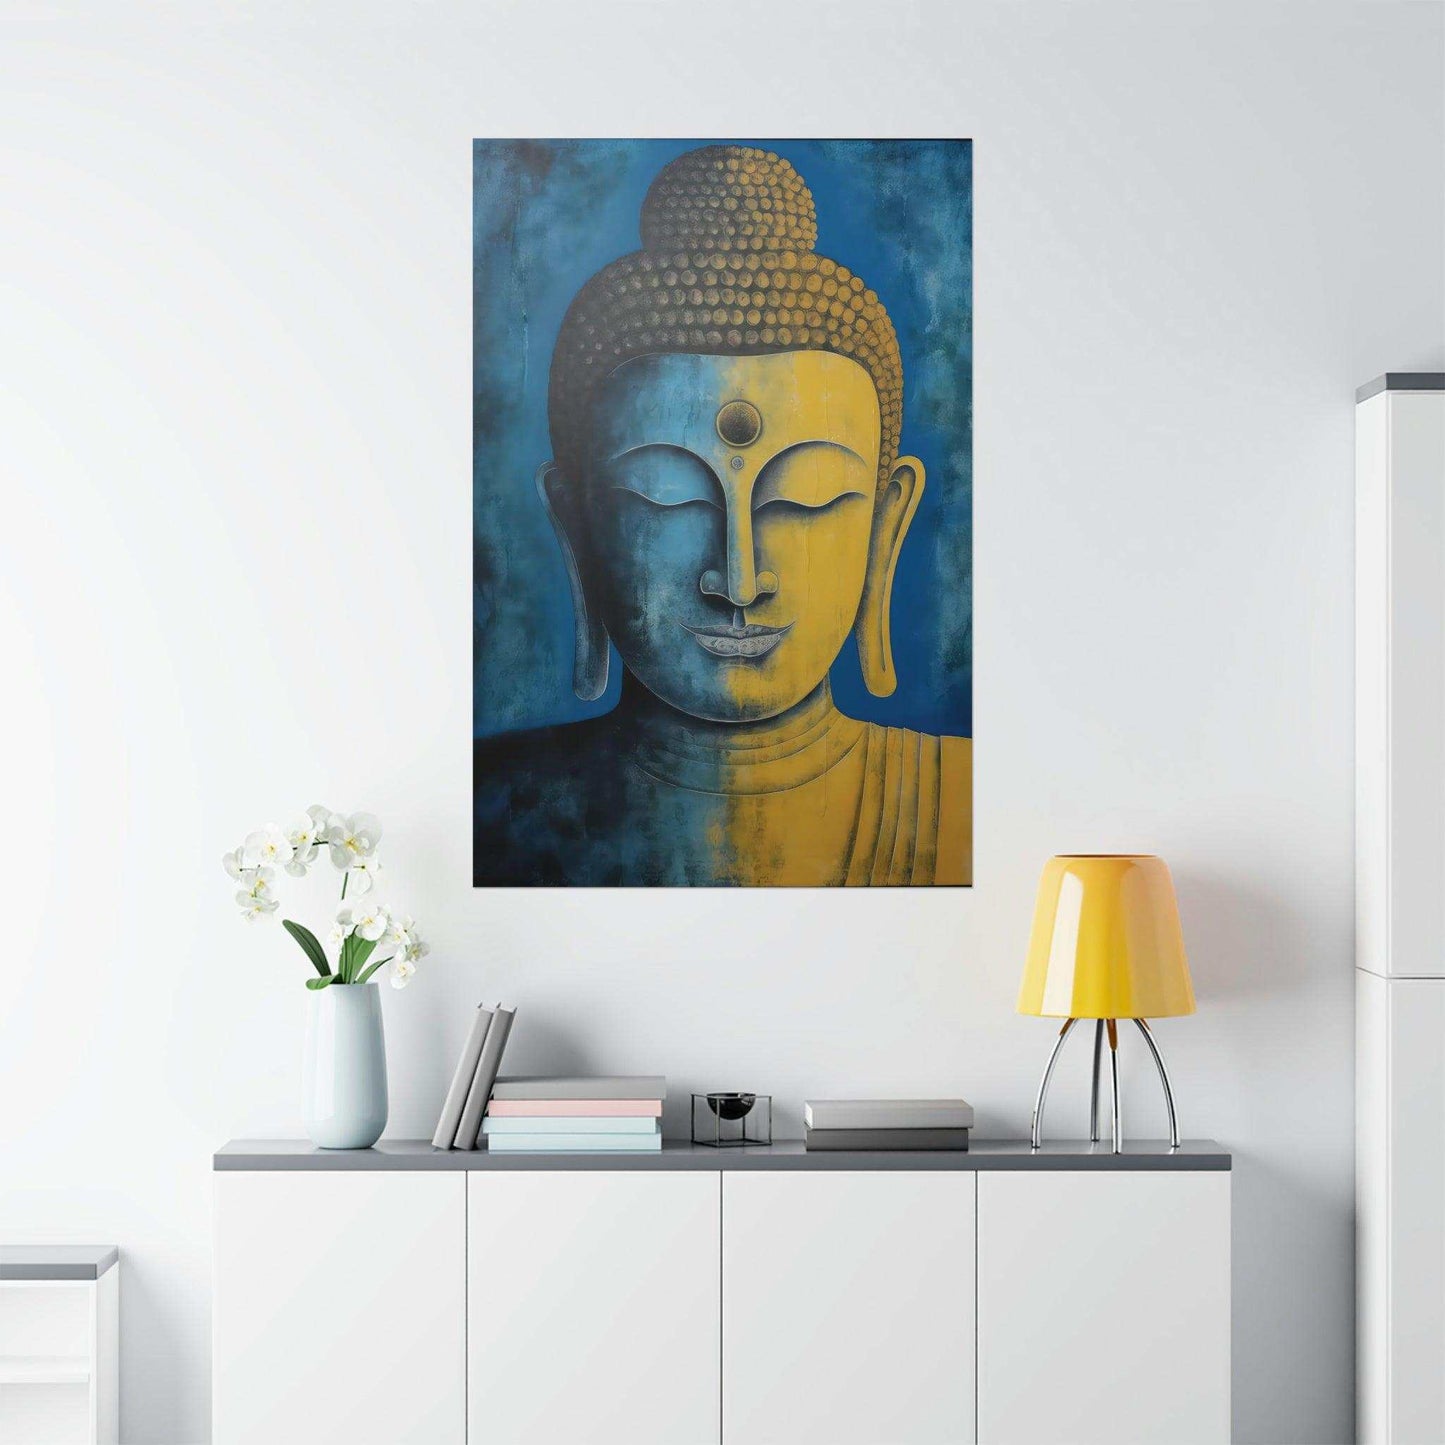 Zen artwork poster featuring a Buddha in contemplation with blue and golden tones on matte paper.